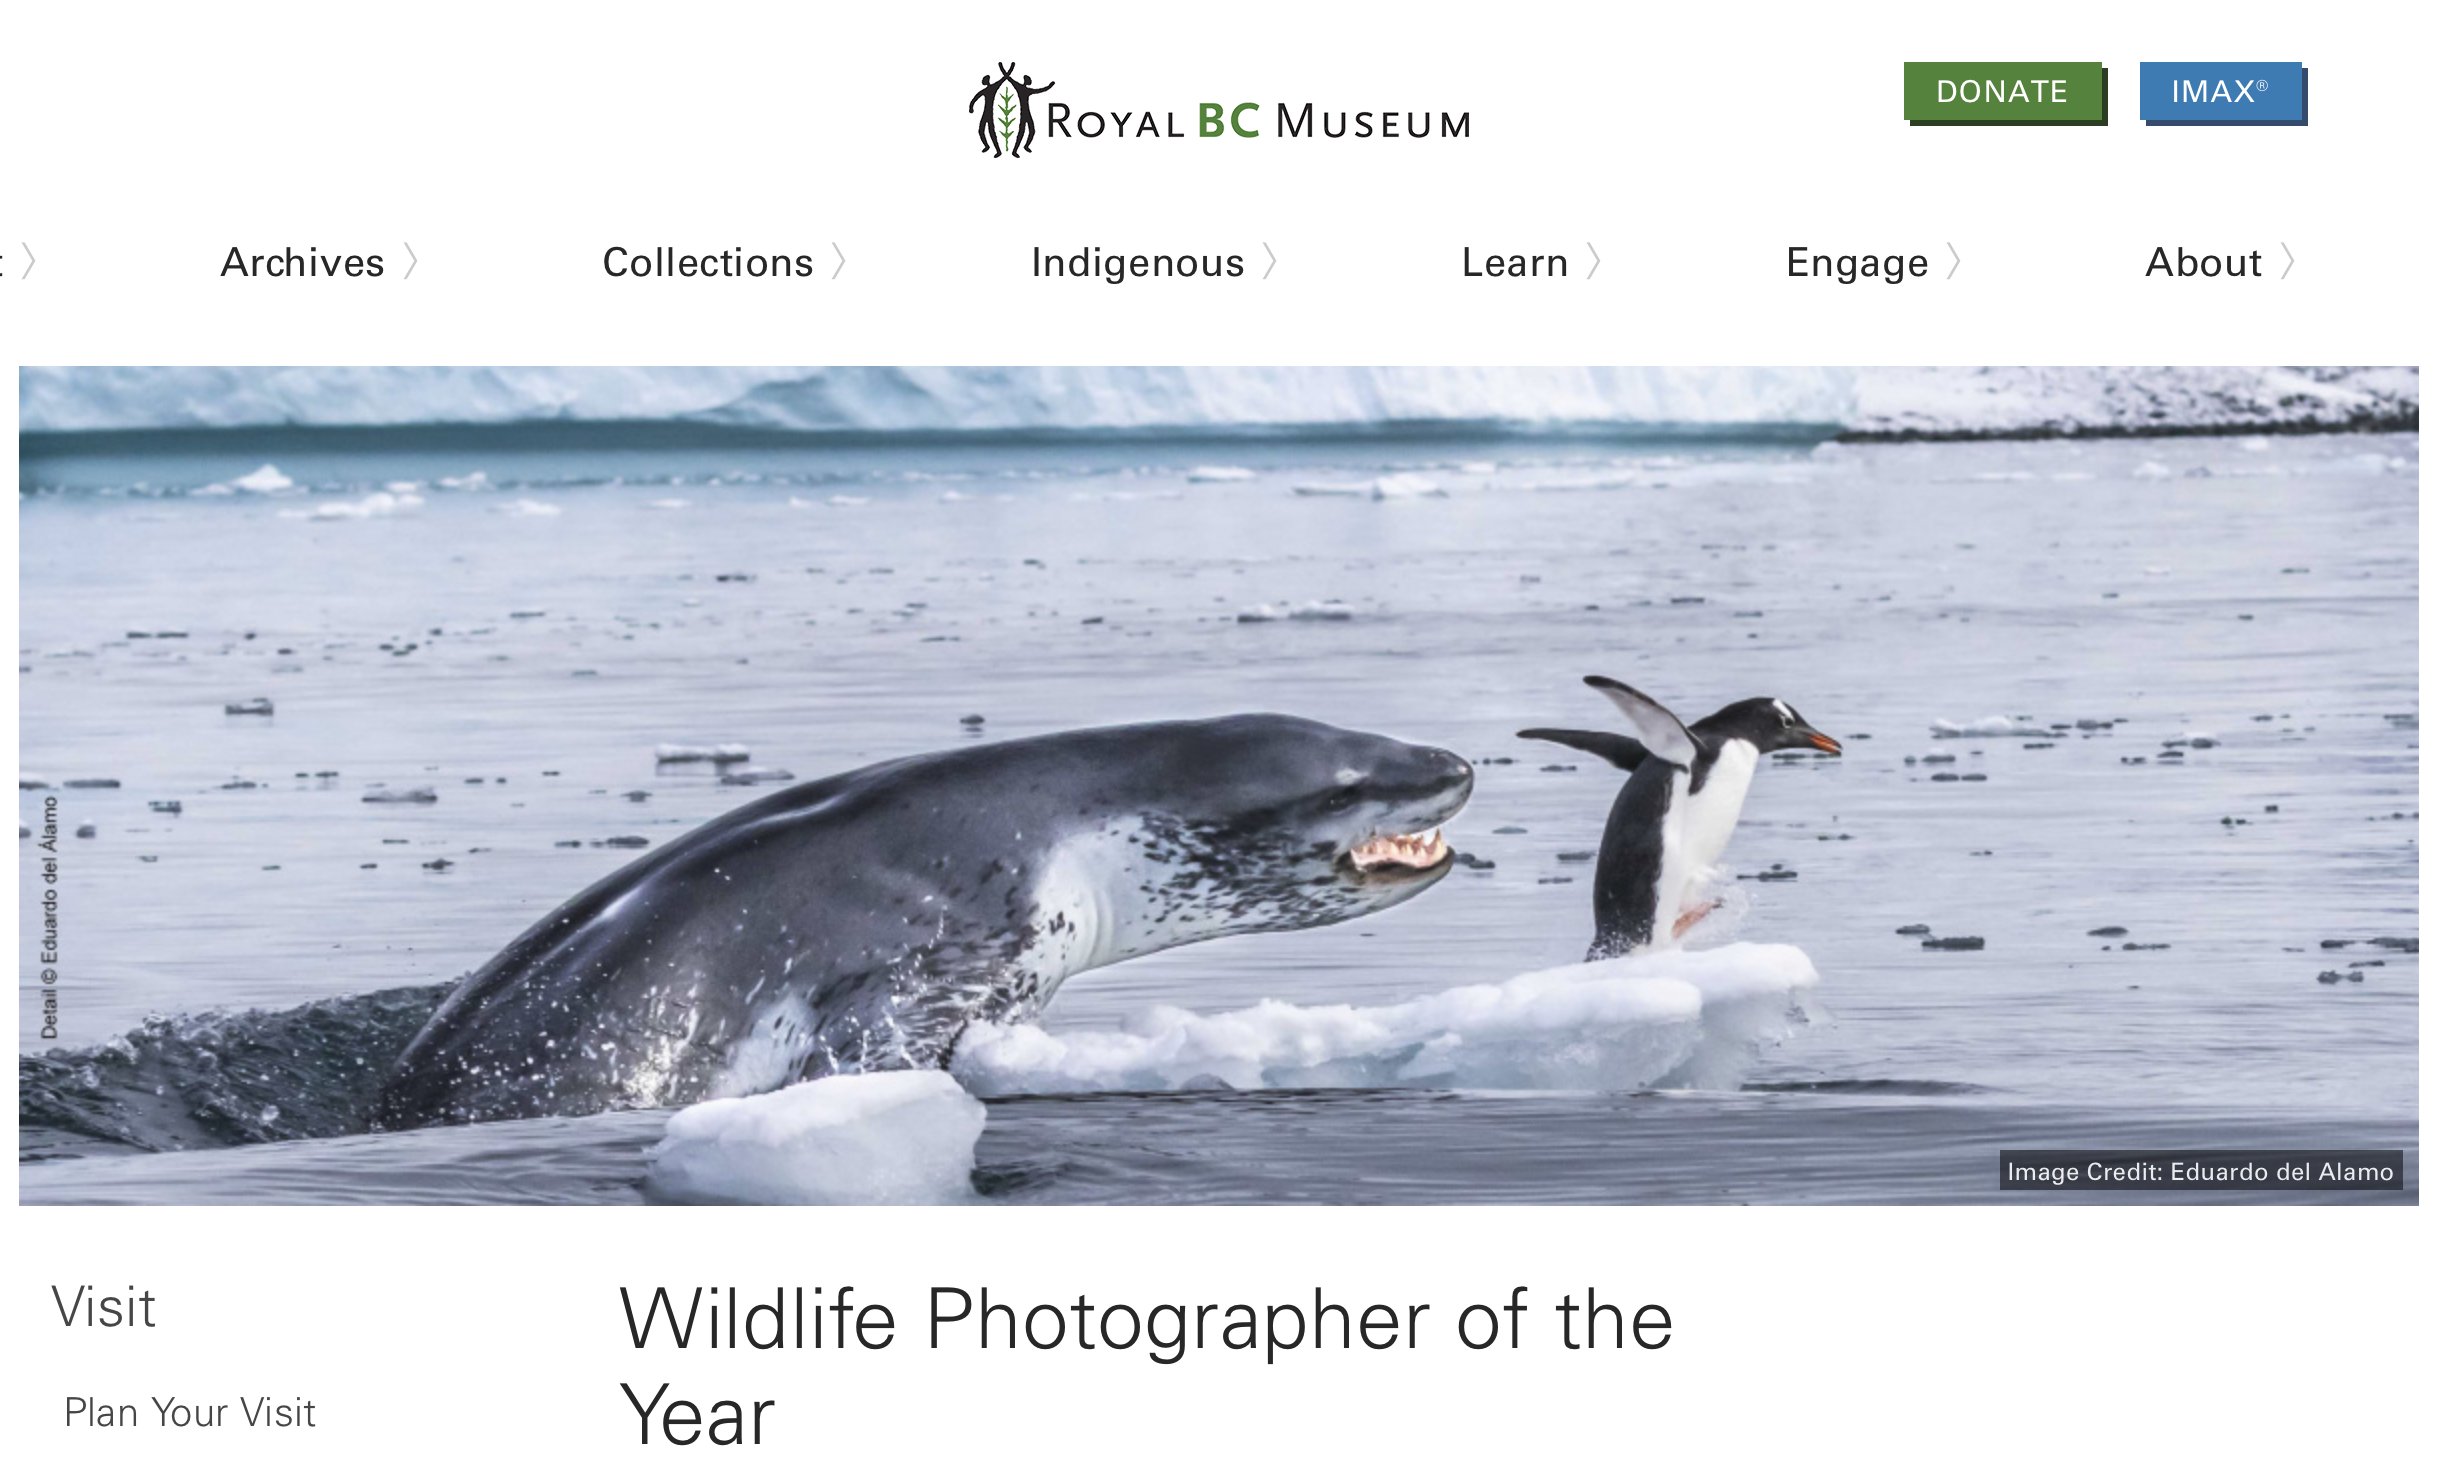 ** Cancelled **Outing to Royal BC Museum - Wildlife Photographer of the Year